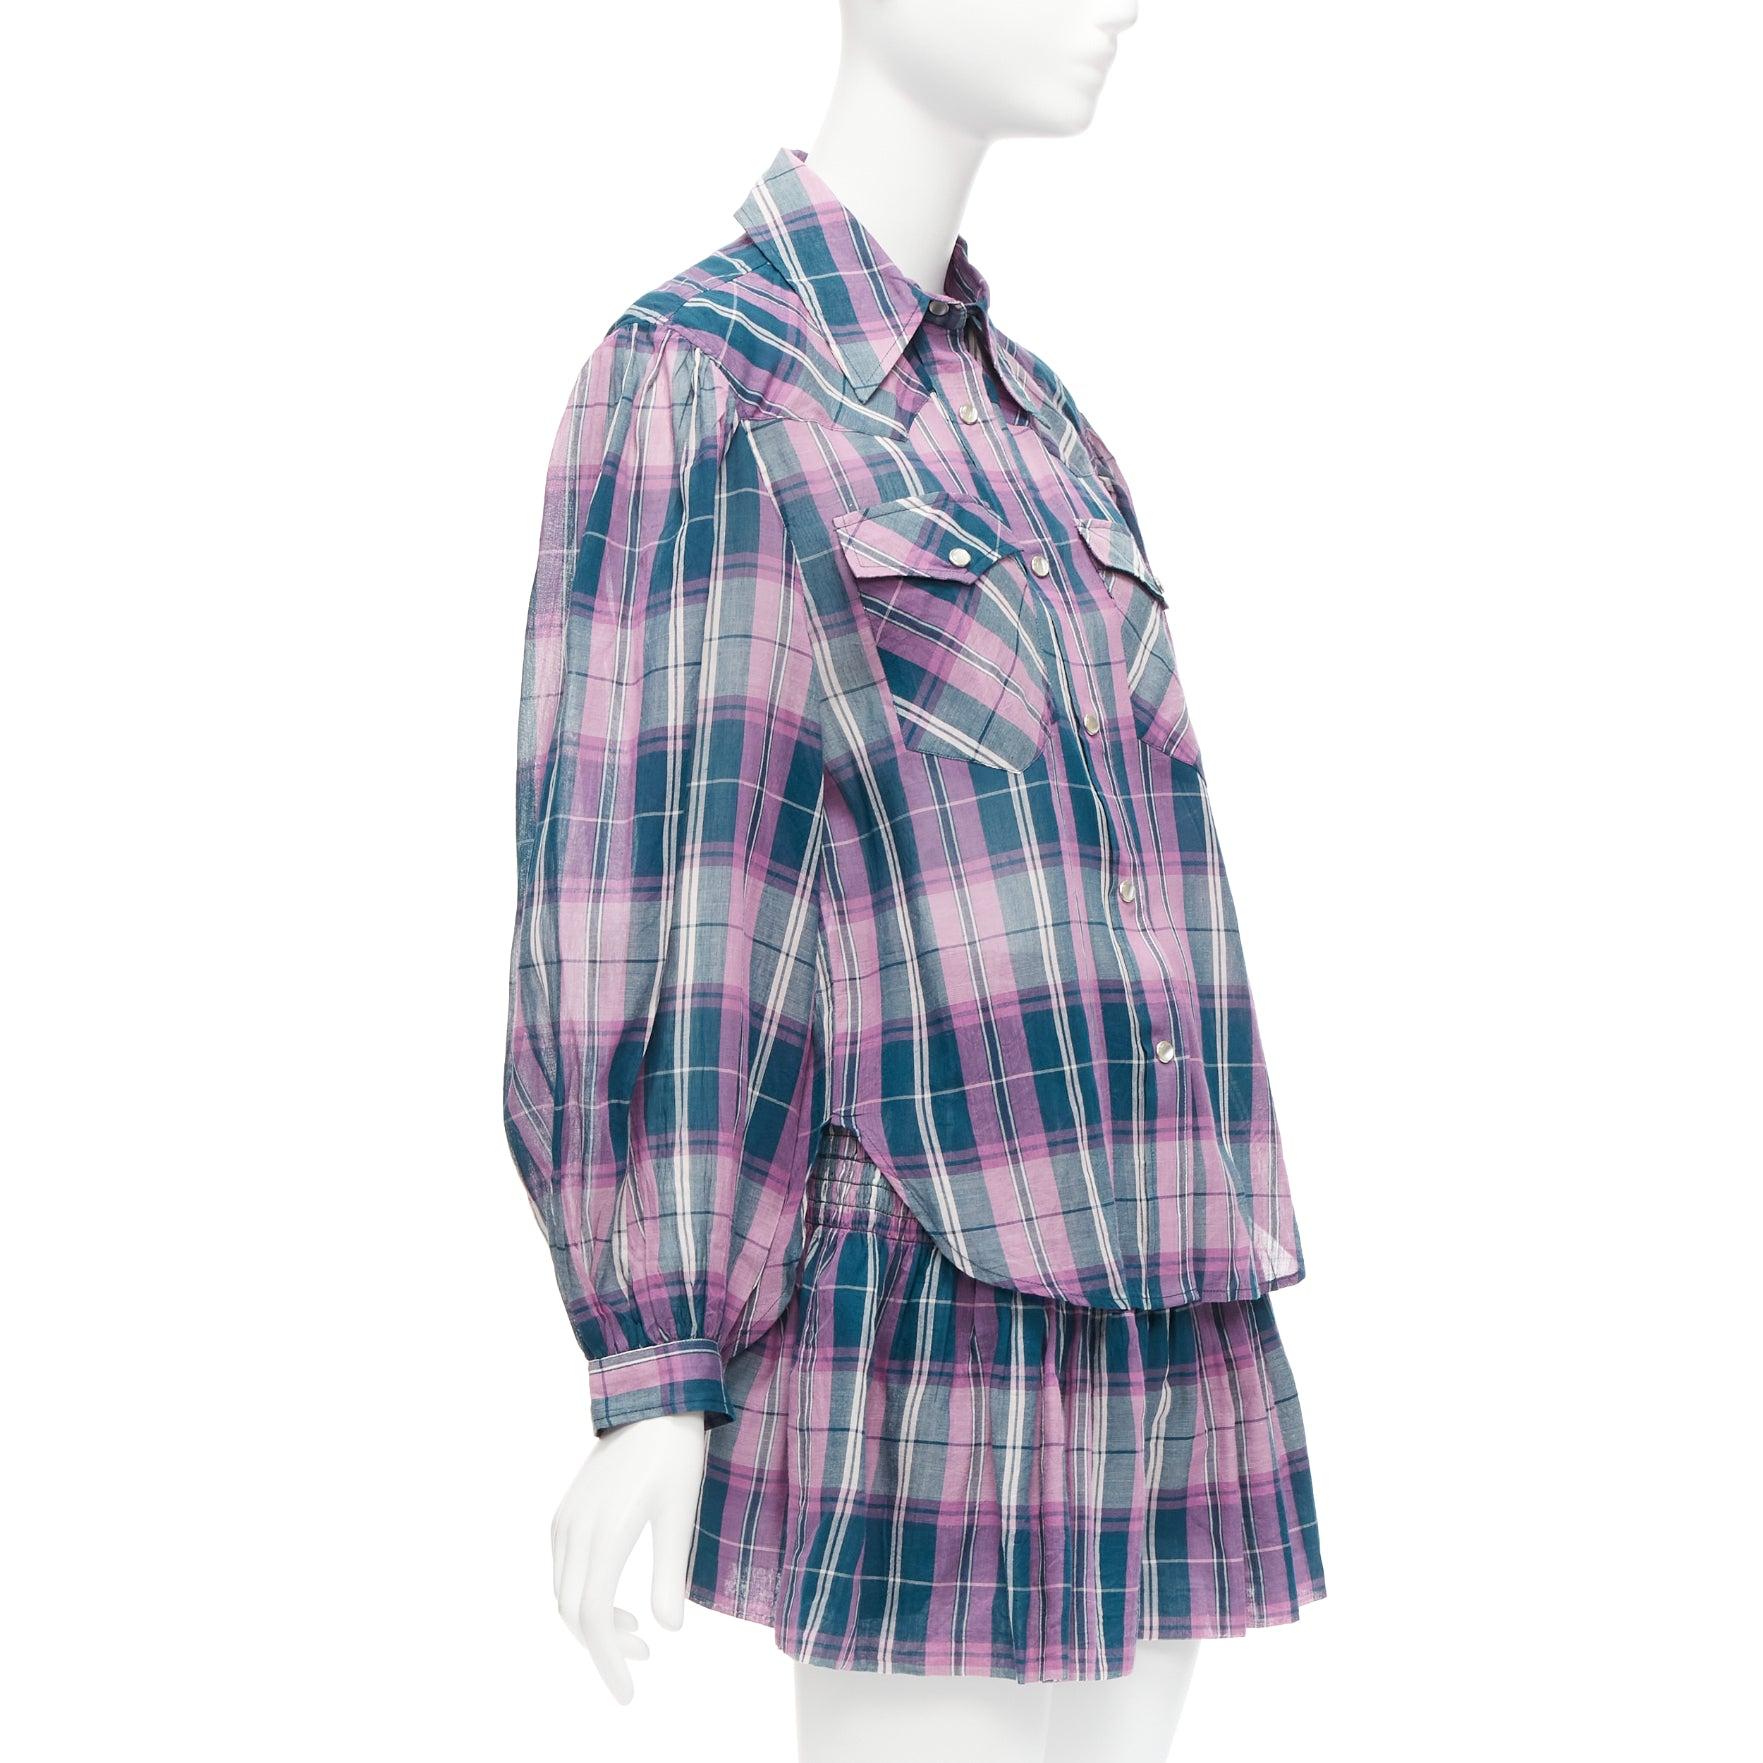 ISABEL MARANT ETOILE Bethany purple cotton check top FR34 XS shorts FR36 S set
Reference: AAWC/A00572
Brand: Isabel Marant
Model: Bethany
Collection: ETOILE
Material: Cotton
Color: Purple
Pattern: Checkered
Closure: Snap Buttons
Extra Details: